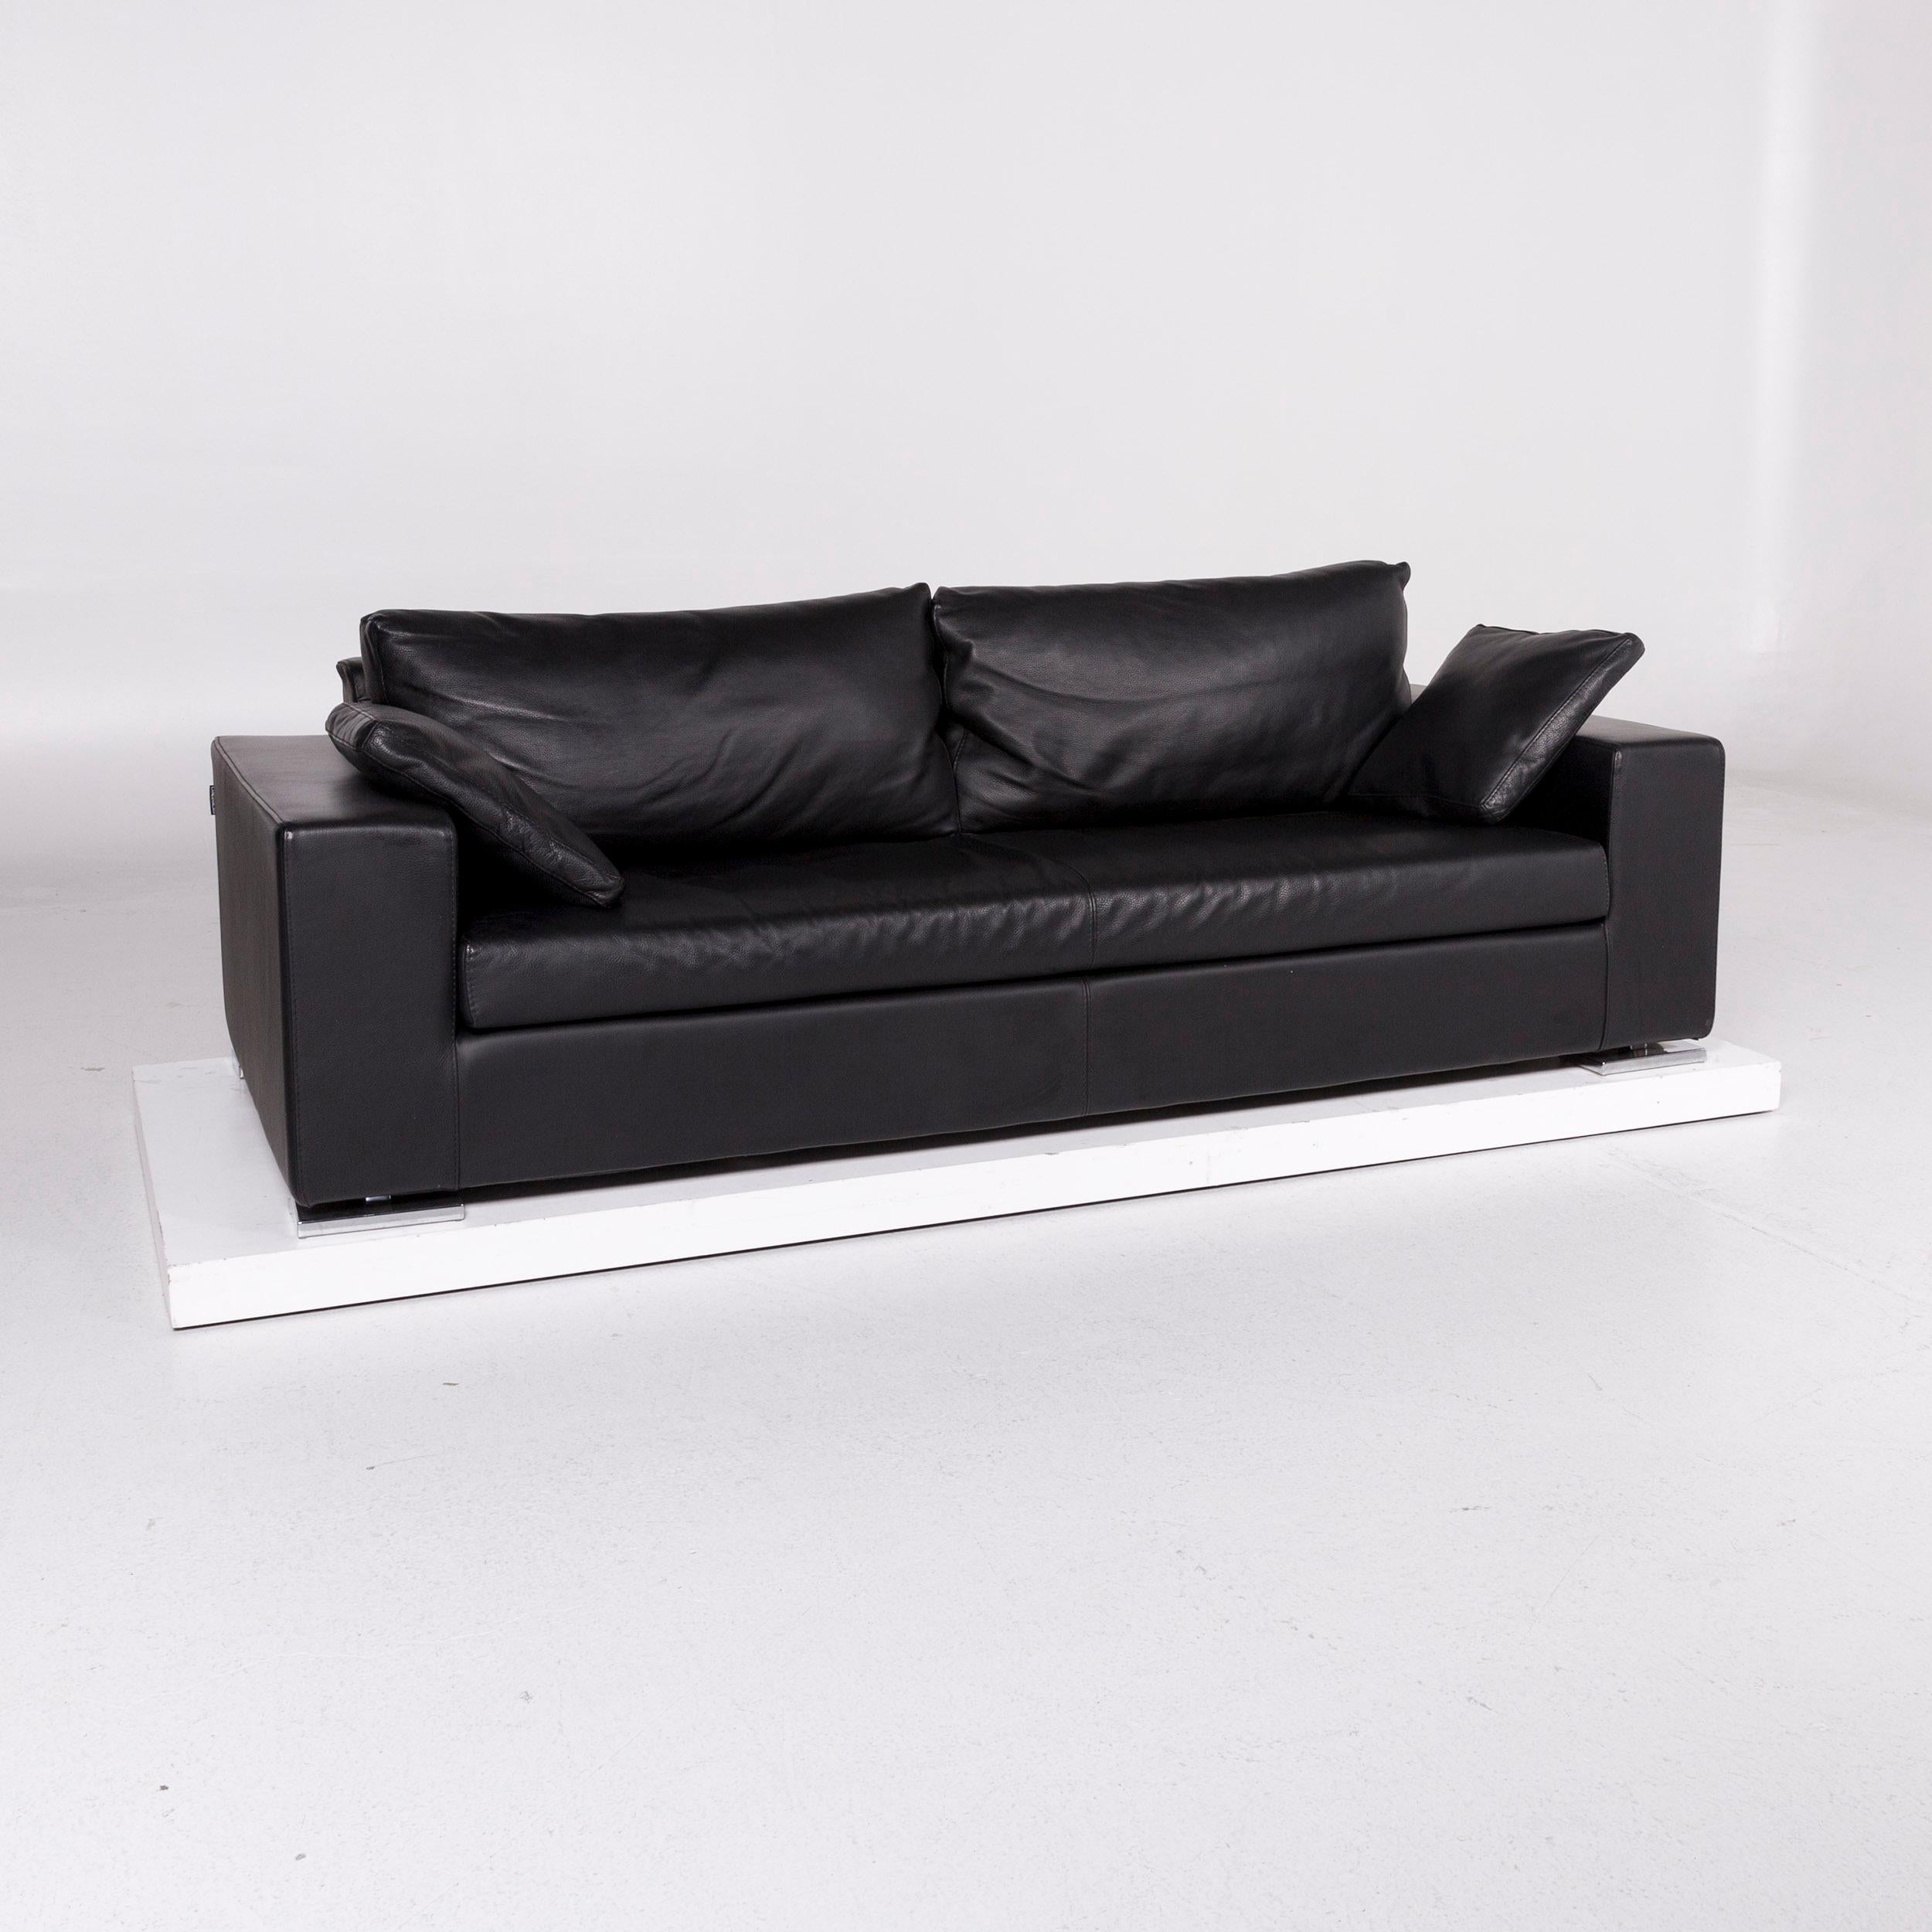 We bring to you a Who's perfect LNC sofa black three-seat couch.
 
 Product measurements in centimeters:
 
Depth 95
Width 223
Height 79
Seat-height 40
Rest-height 54
Seat-depth 49
Seat-width 143
Back-height 37.
 